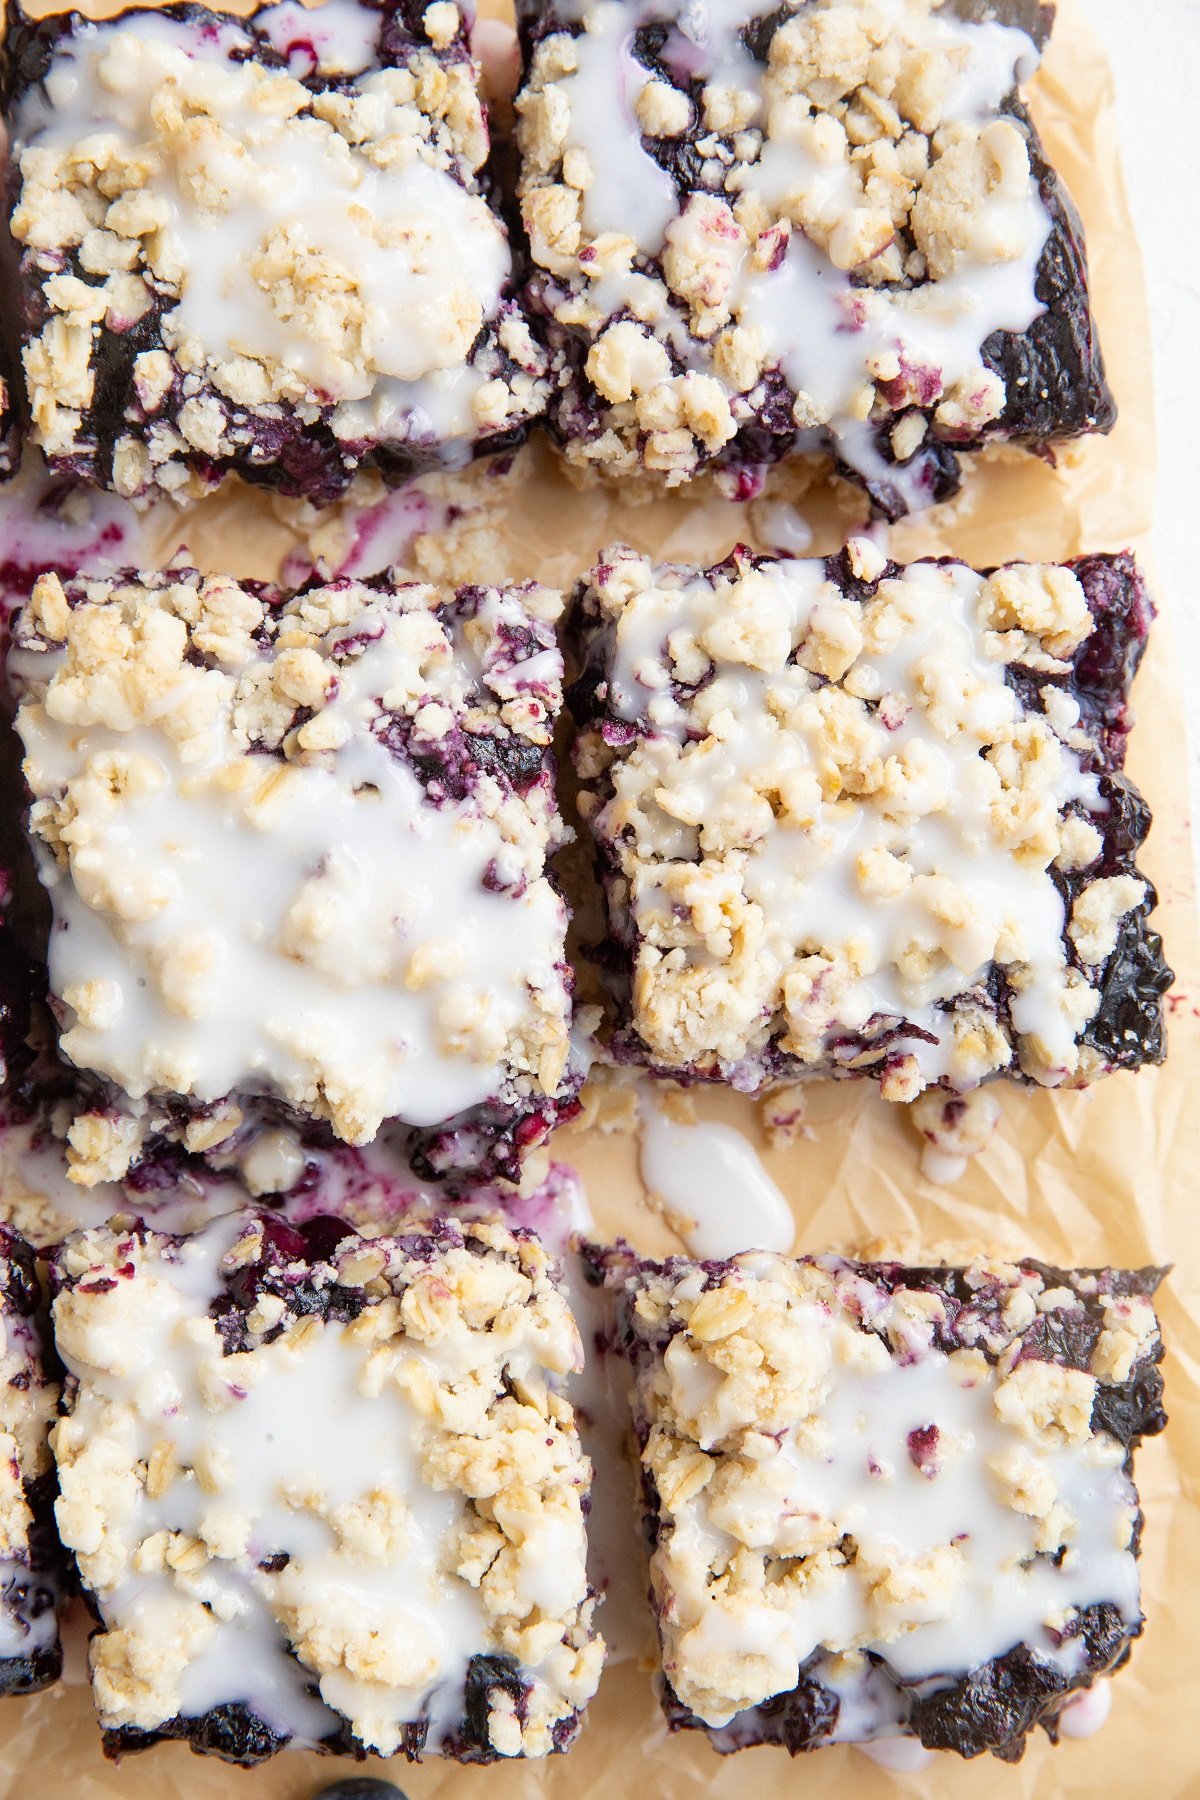 Blueberry crumb bars cut on a piece of parchment paper.